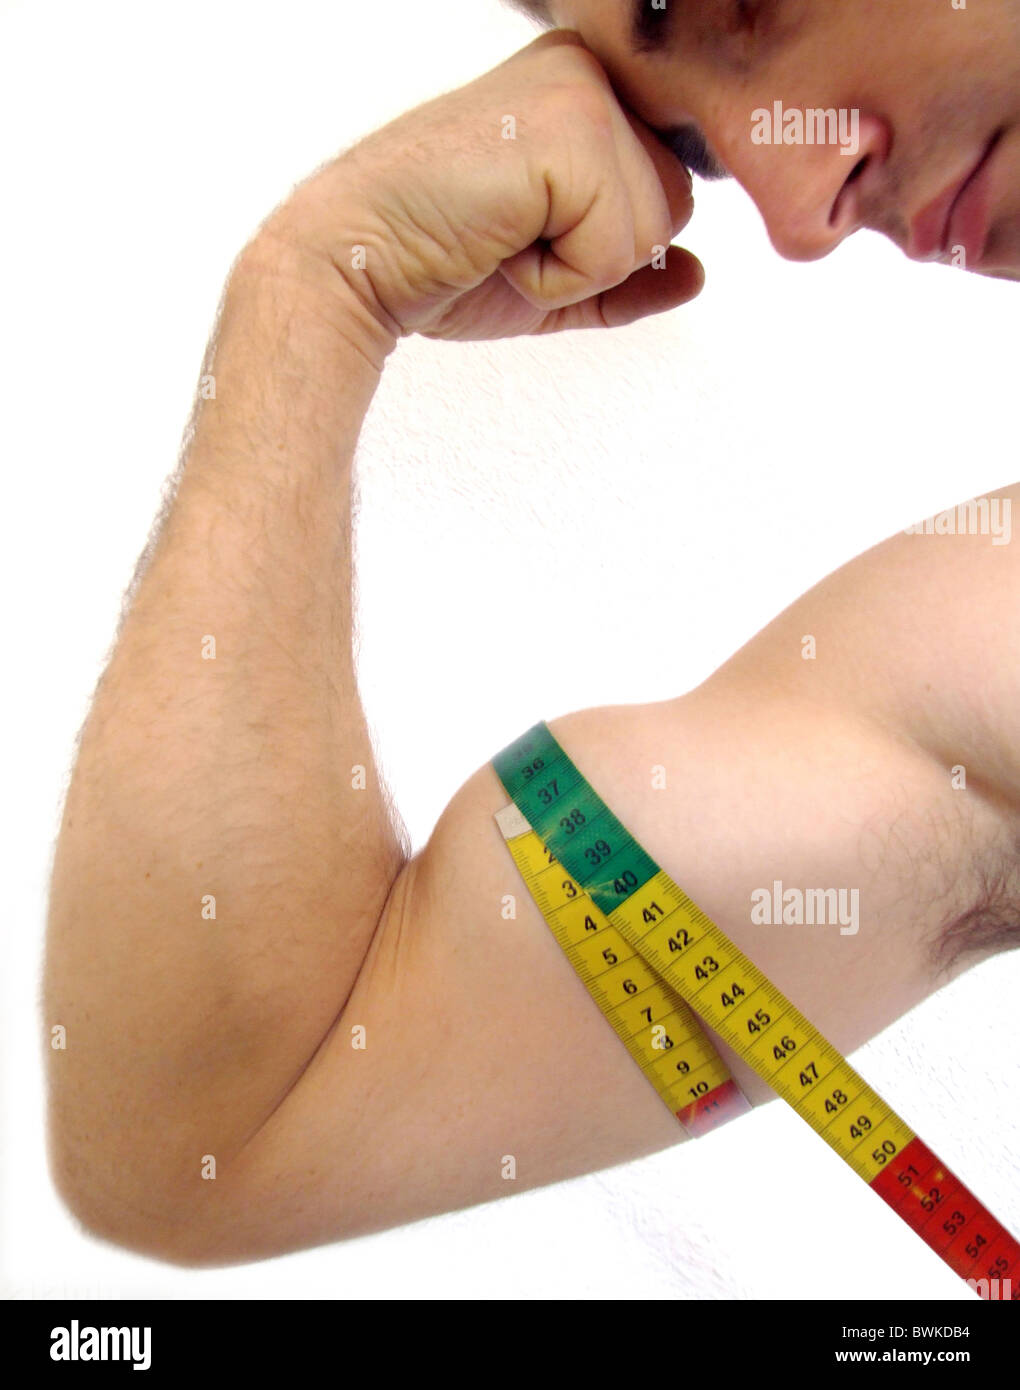 Impressive bicep on display. Muscular man measuring his bicep with a measuring  tape. Stock Photo by YuriArcursPeopleimages